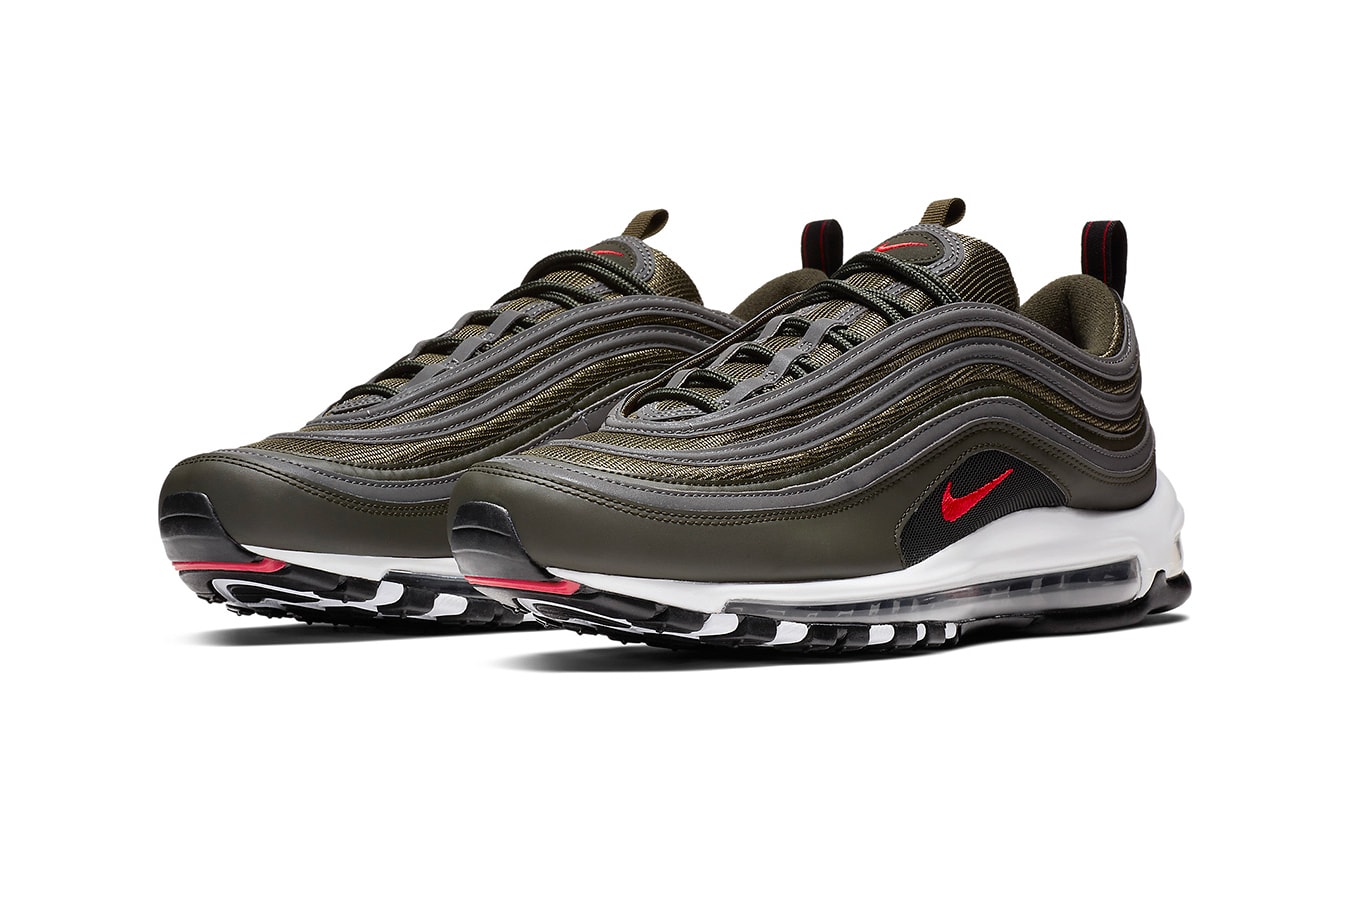 Nike Air Max 97 Sequoia october fall 2018 release sneakers university red